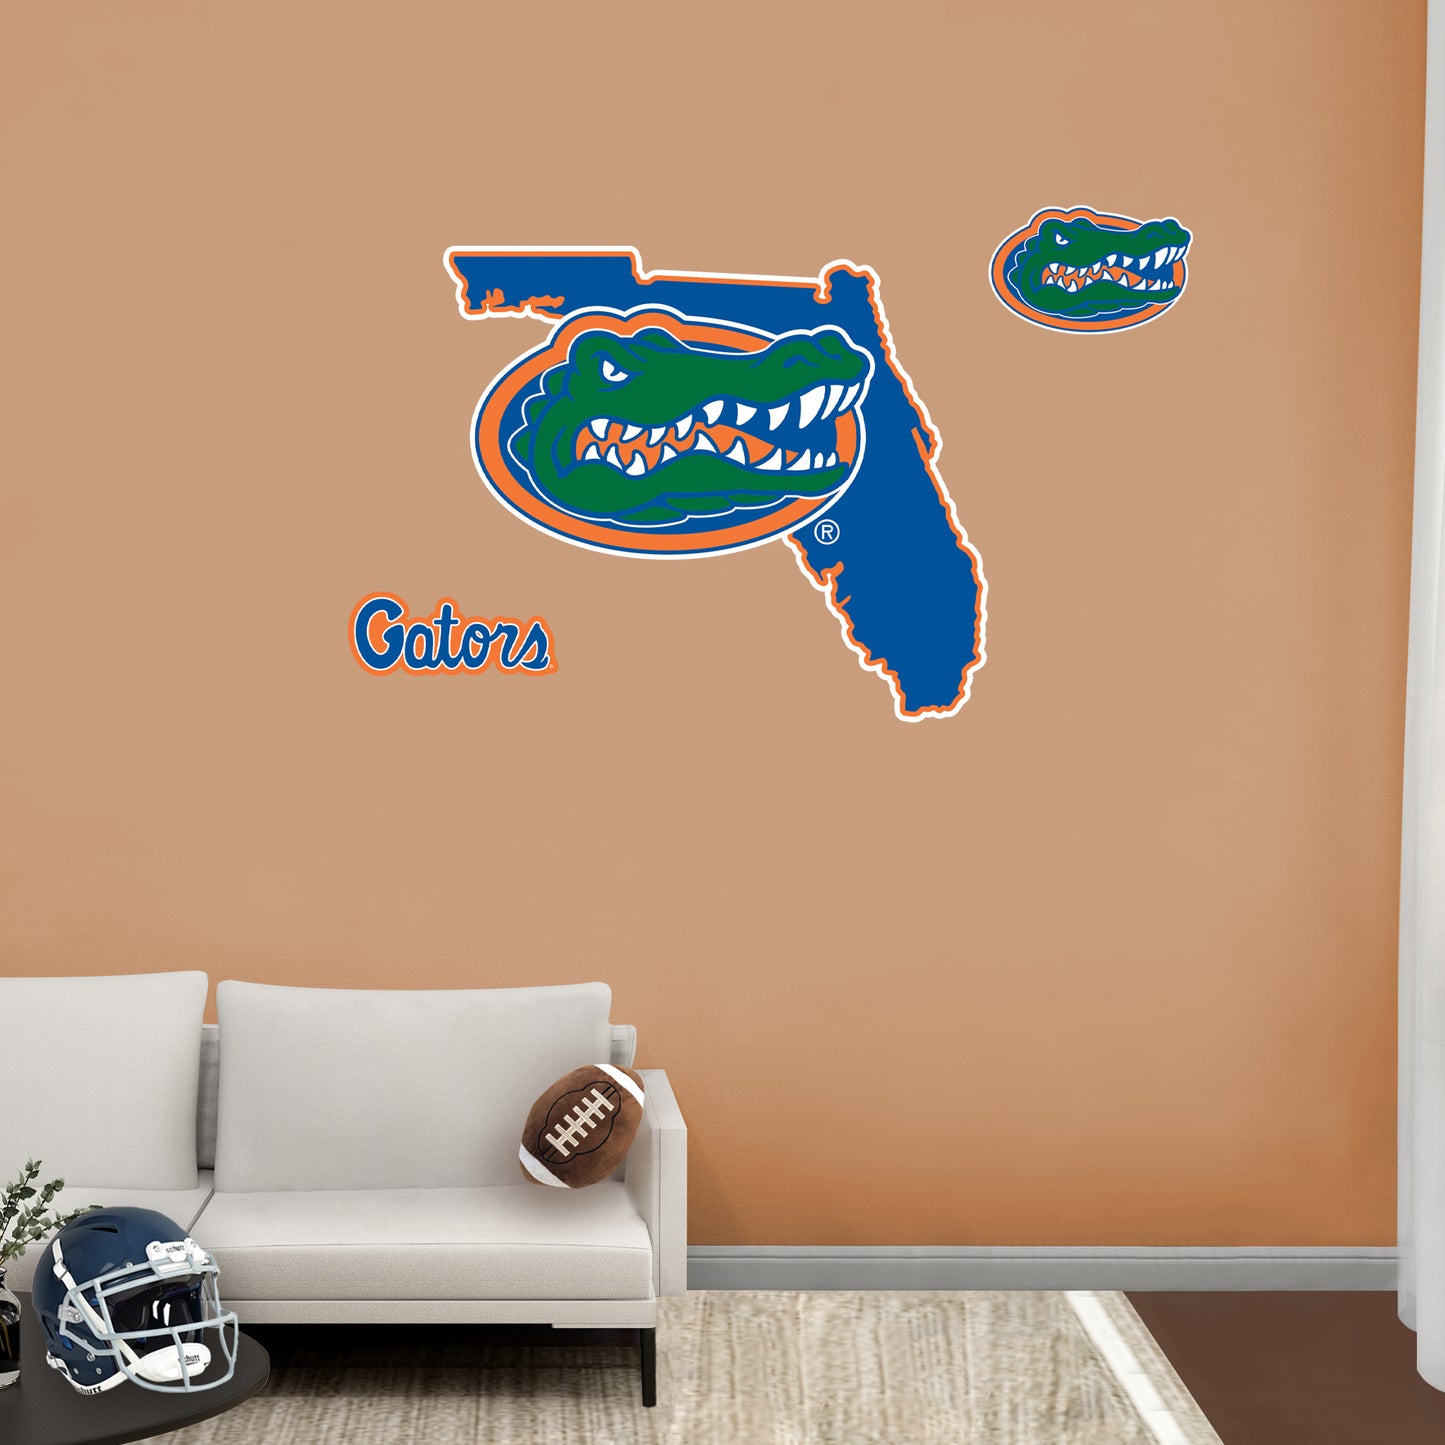 Florida Gators: State of Florida Logo - Officially Licensed NCAA Removable Adhesive Decal